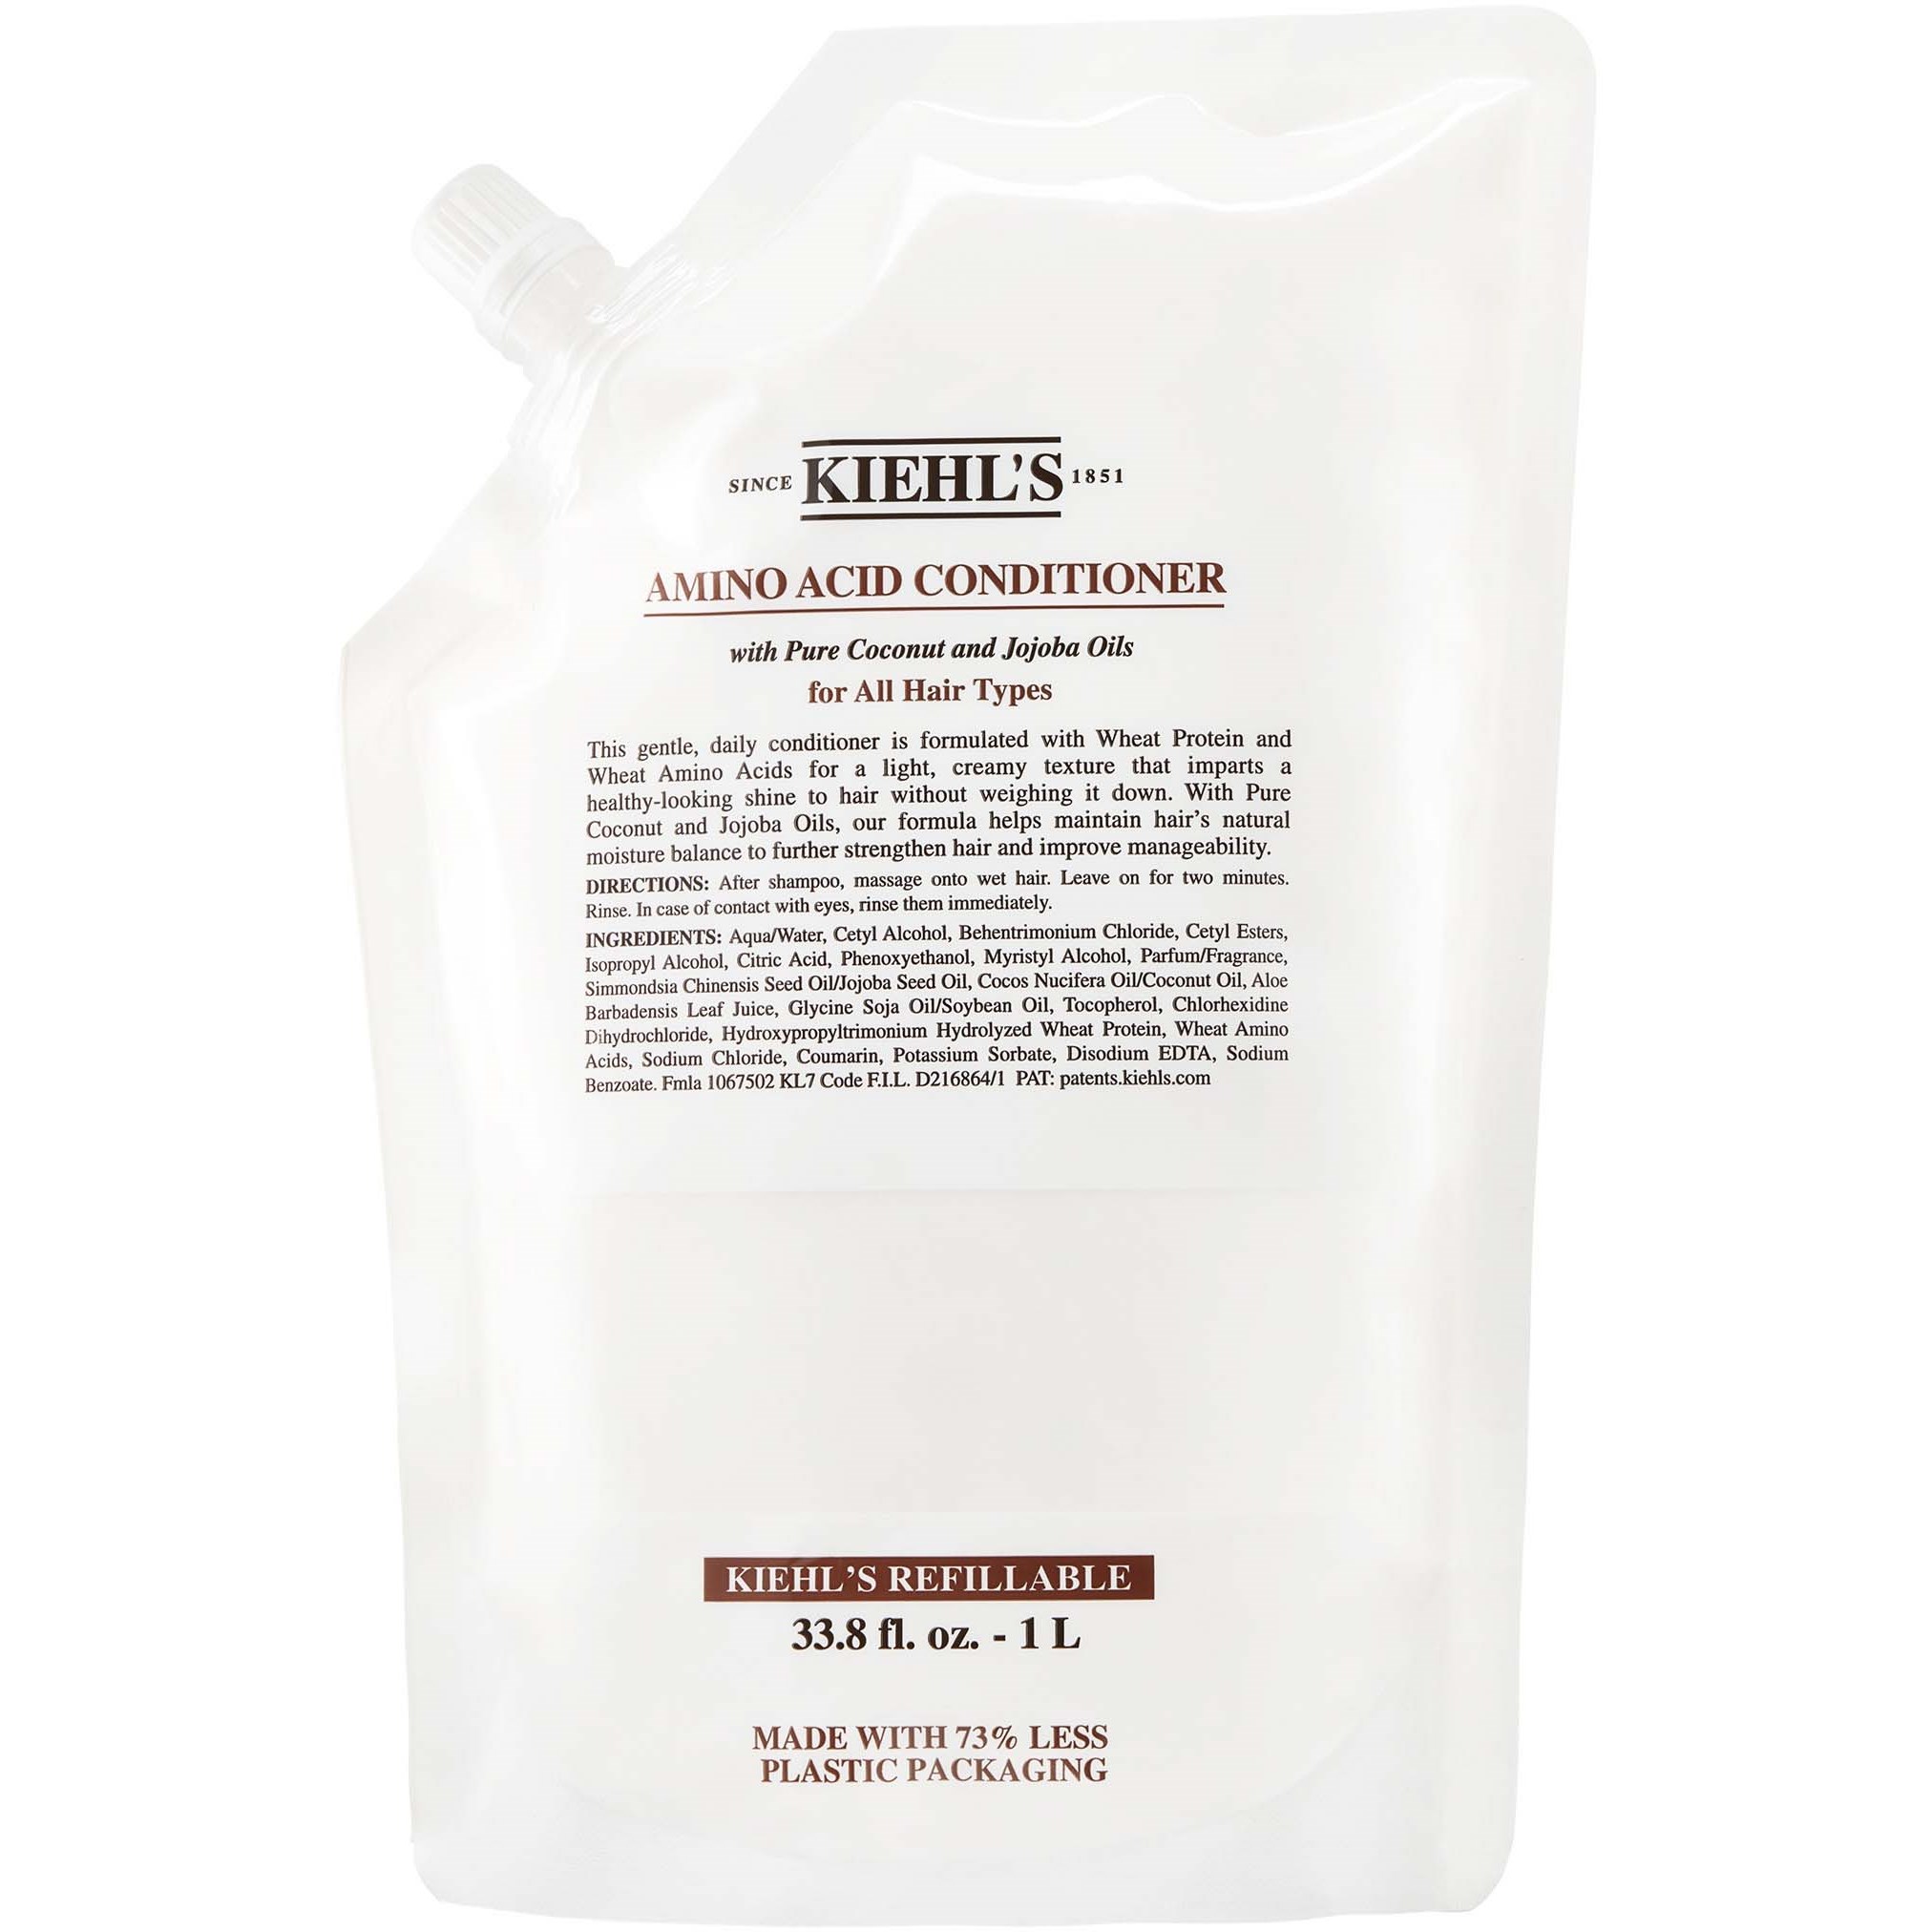 Kiehl's Amino Acid Hair Care Conditioner with Coconut Oil Refill